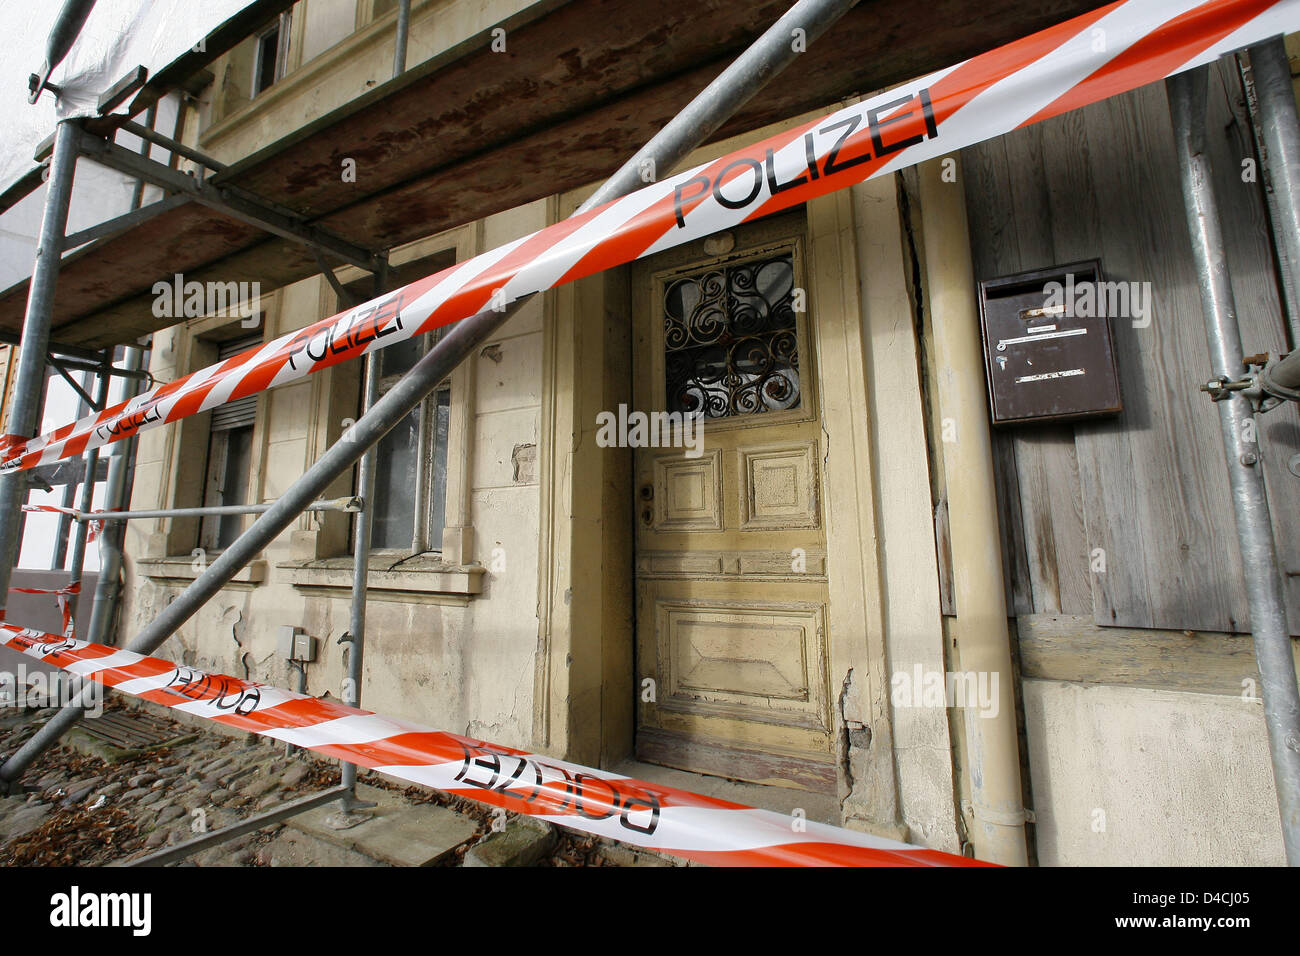 A house parcially covered by a scaffolding is cordoned off by police tape in the Mauer street in Nauen, Germany, 06 February 2008. The house is the discovery site of a dead baby, who was found in a plastic bag in an open cellar by the house's owner on an inspection tour. After the discovery the police searches for the mother of the dead infant. An autopsy was ordered for the 06 Feb Stock Photo